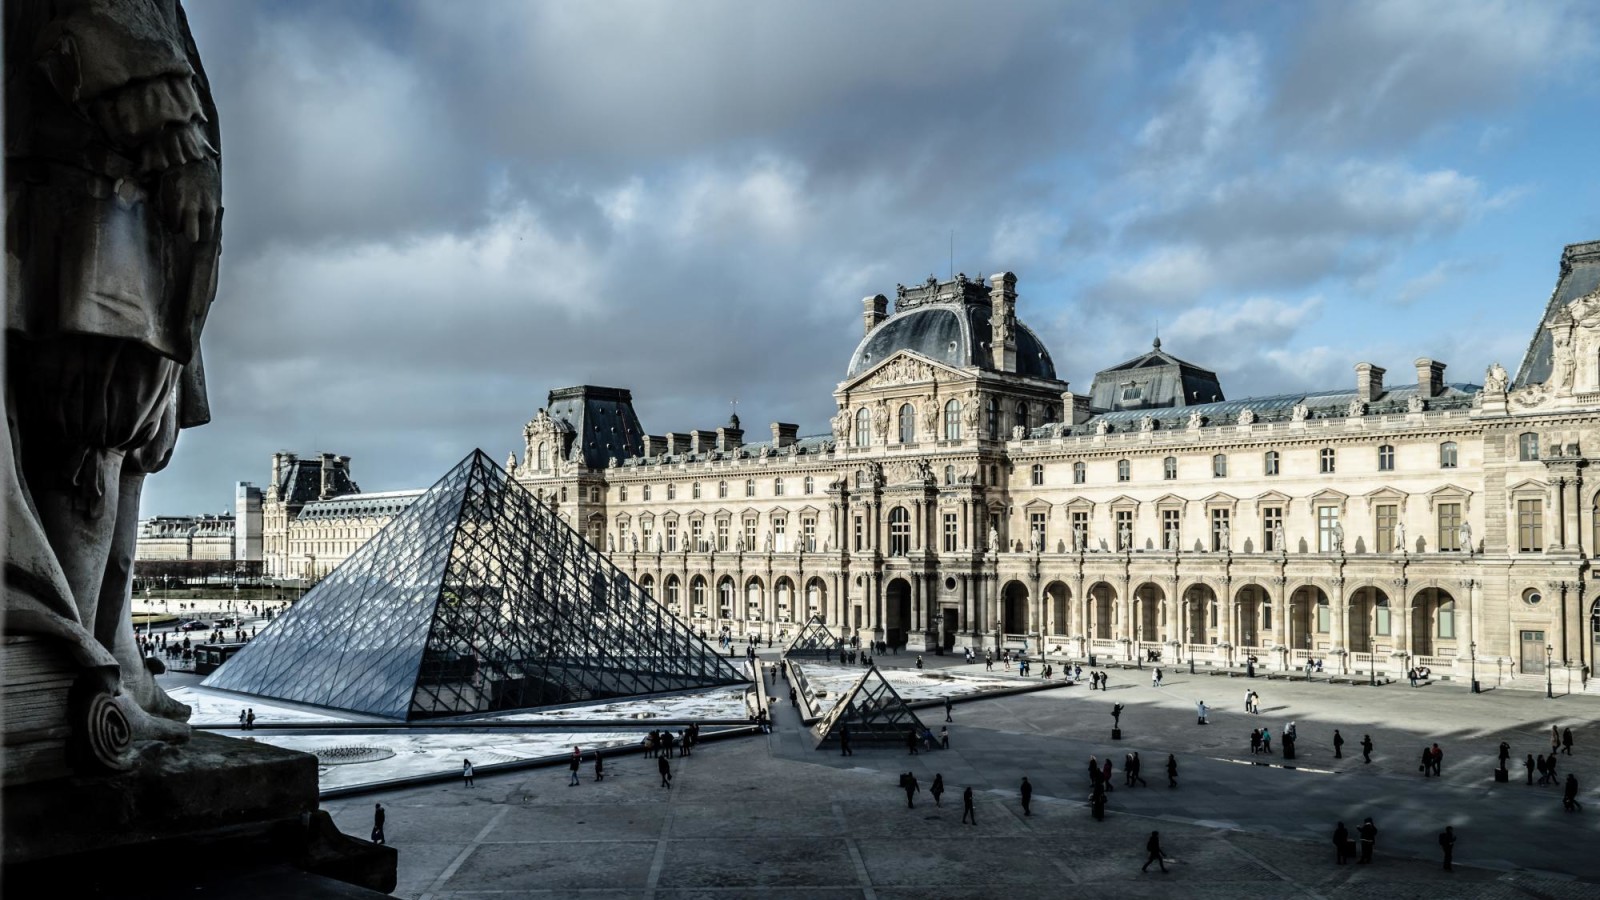 The entrance of the Louvre and famous pyramid in Paris on a cloudy day.